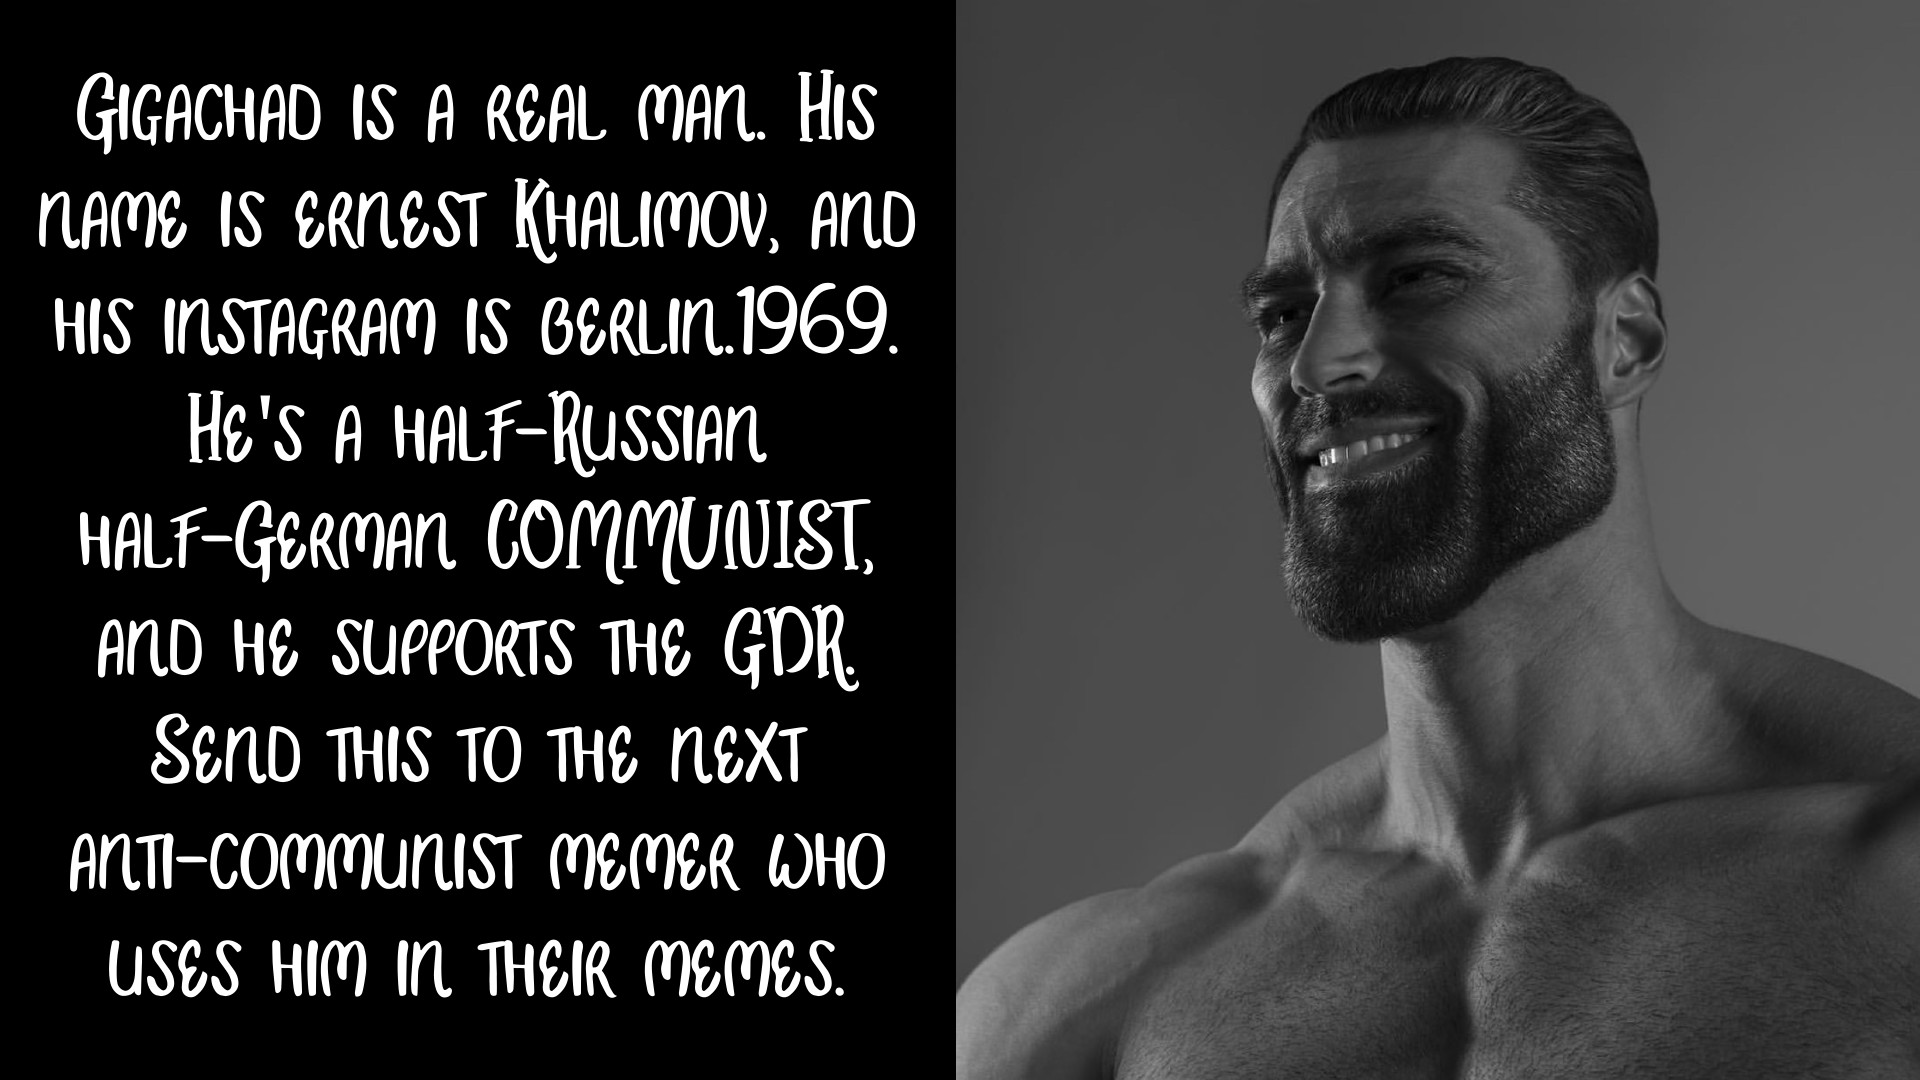 Gigachad is a real person, and he's a tankie too - Lemmygrad